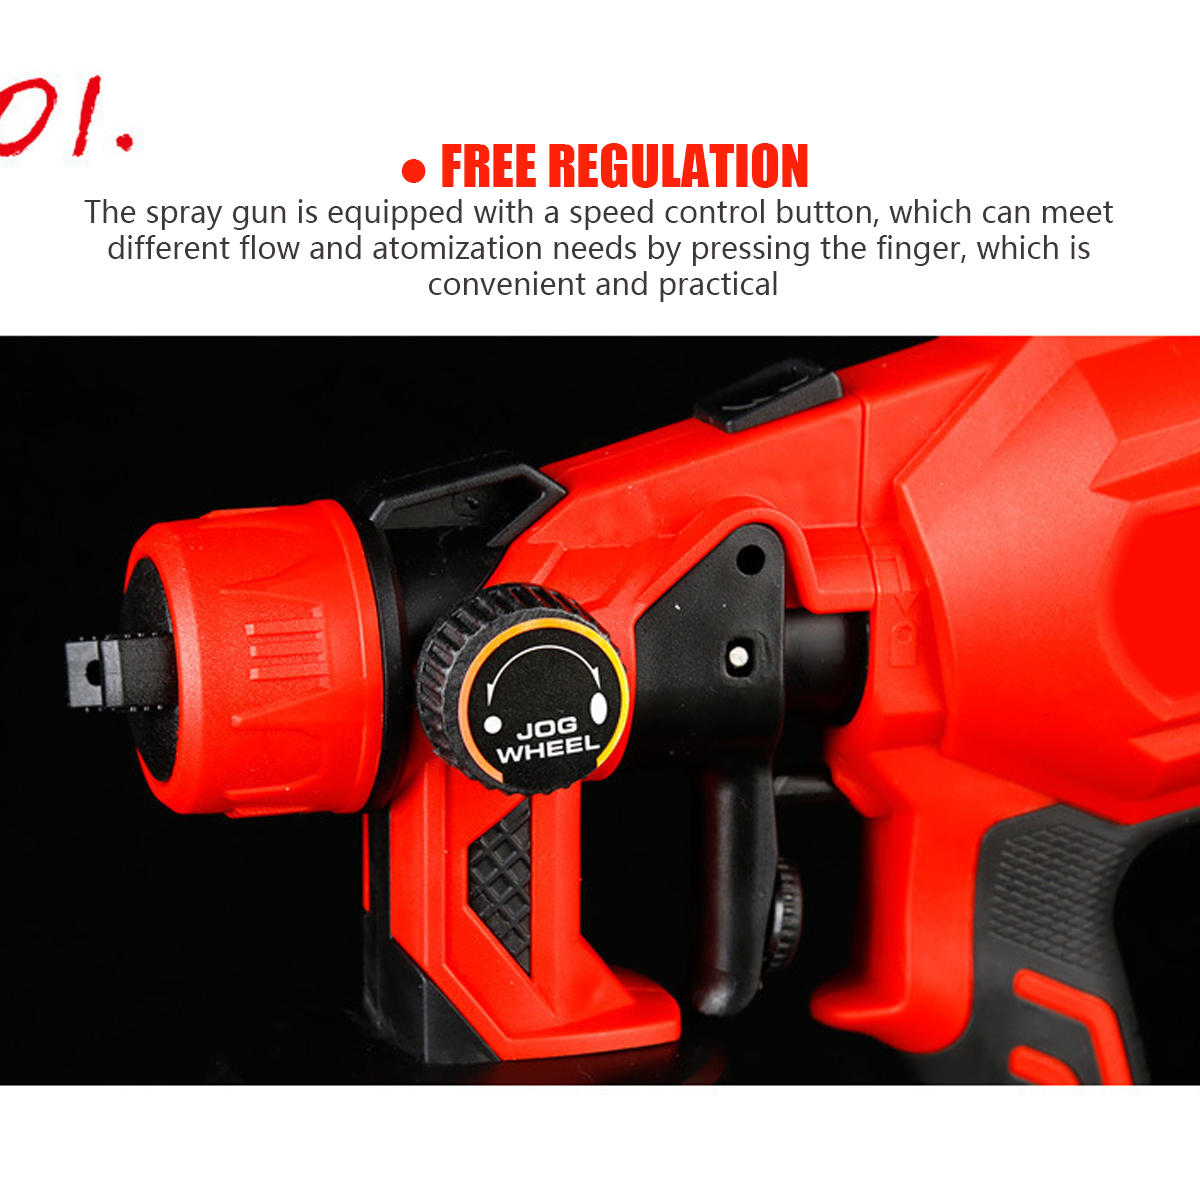 Removable-Electric-Paint-Spray-Guns-High-Pressure-Gravity-Feed-Kit-Speed-Regulator-Paint-Tools-Prime-1873508-3